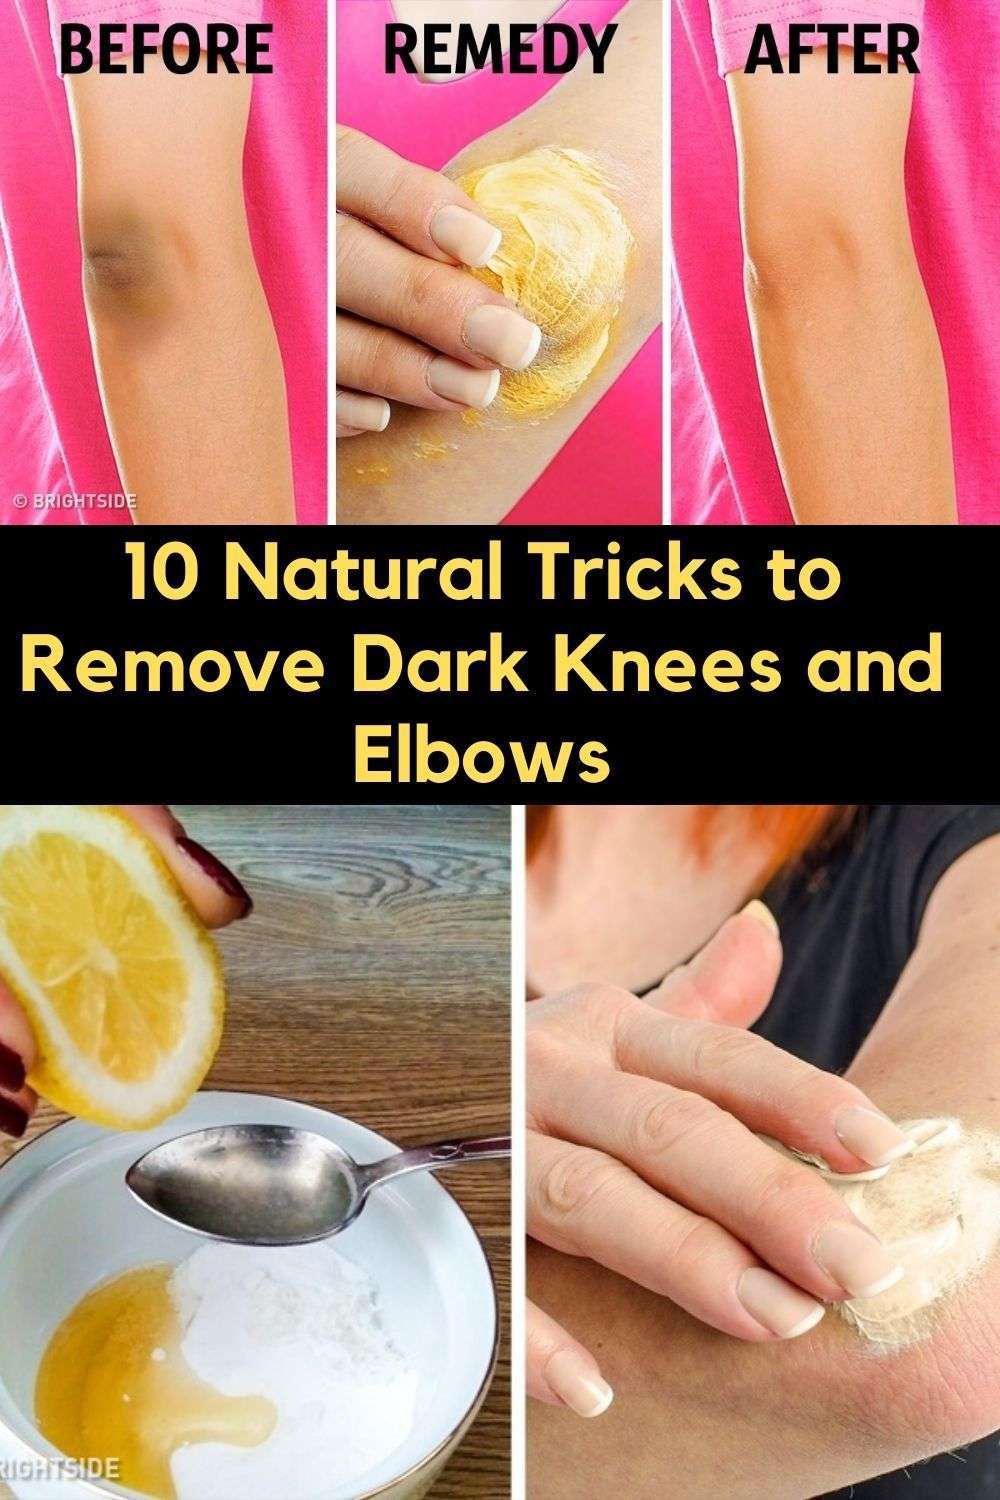 10 Natural Tricks to Remove Dark Knees and Elbows ...